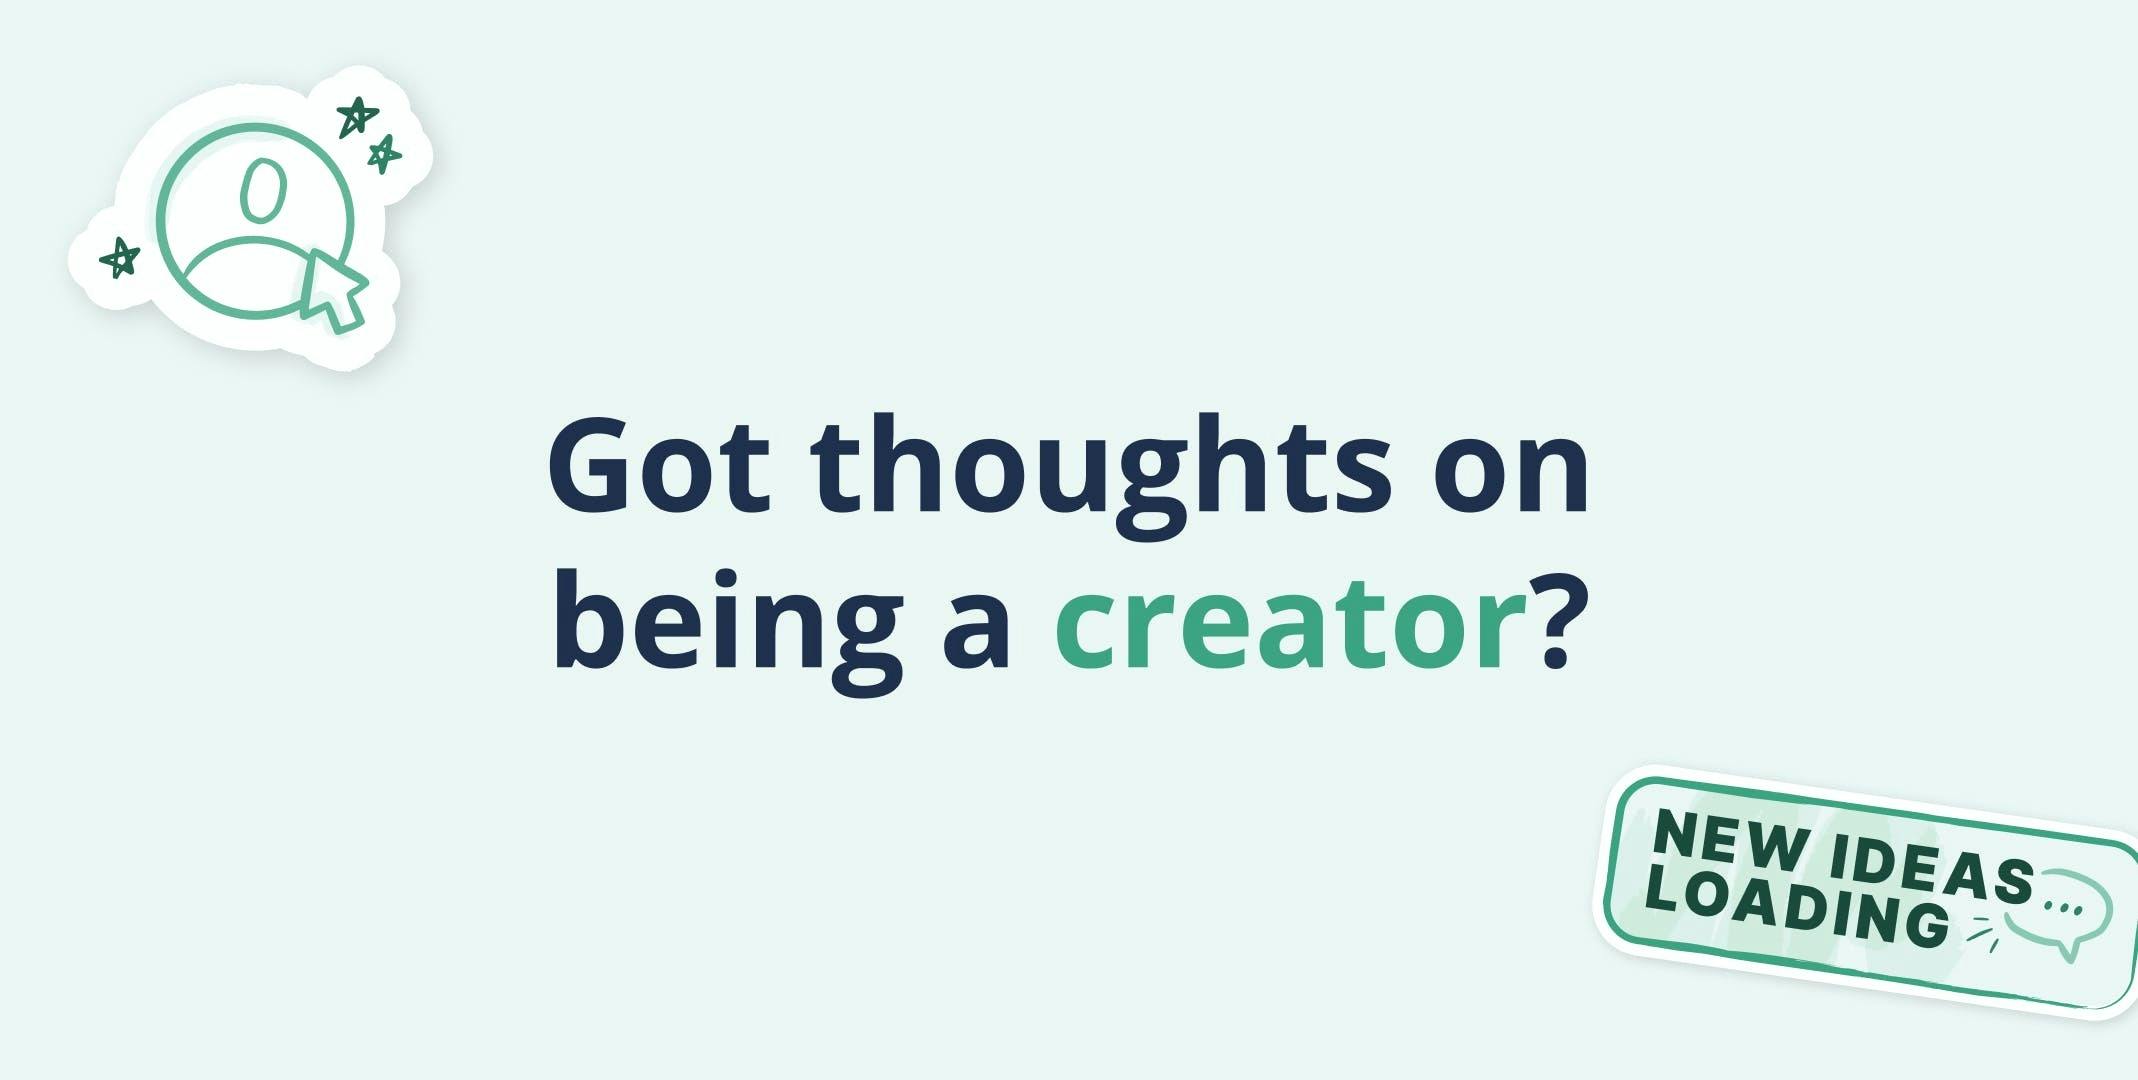 Got thoughts on being a creator? [Take the survey]